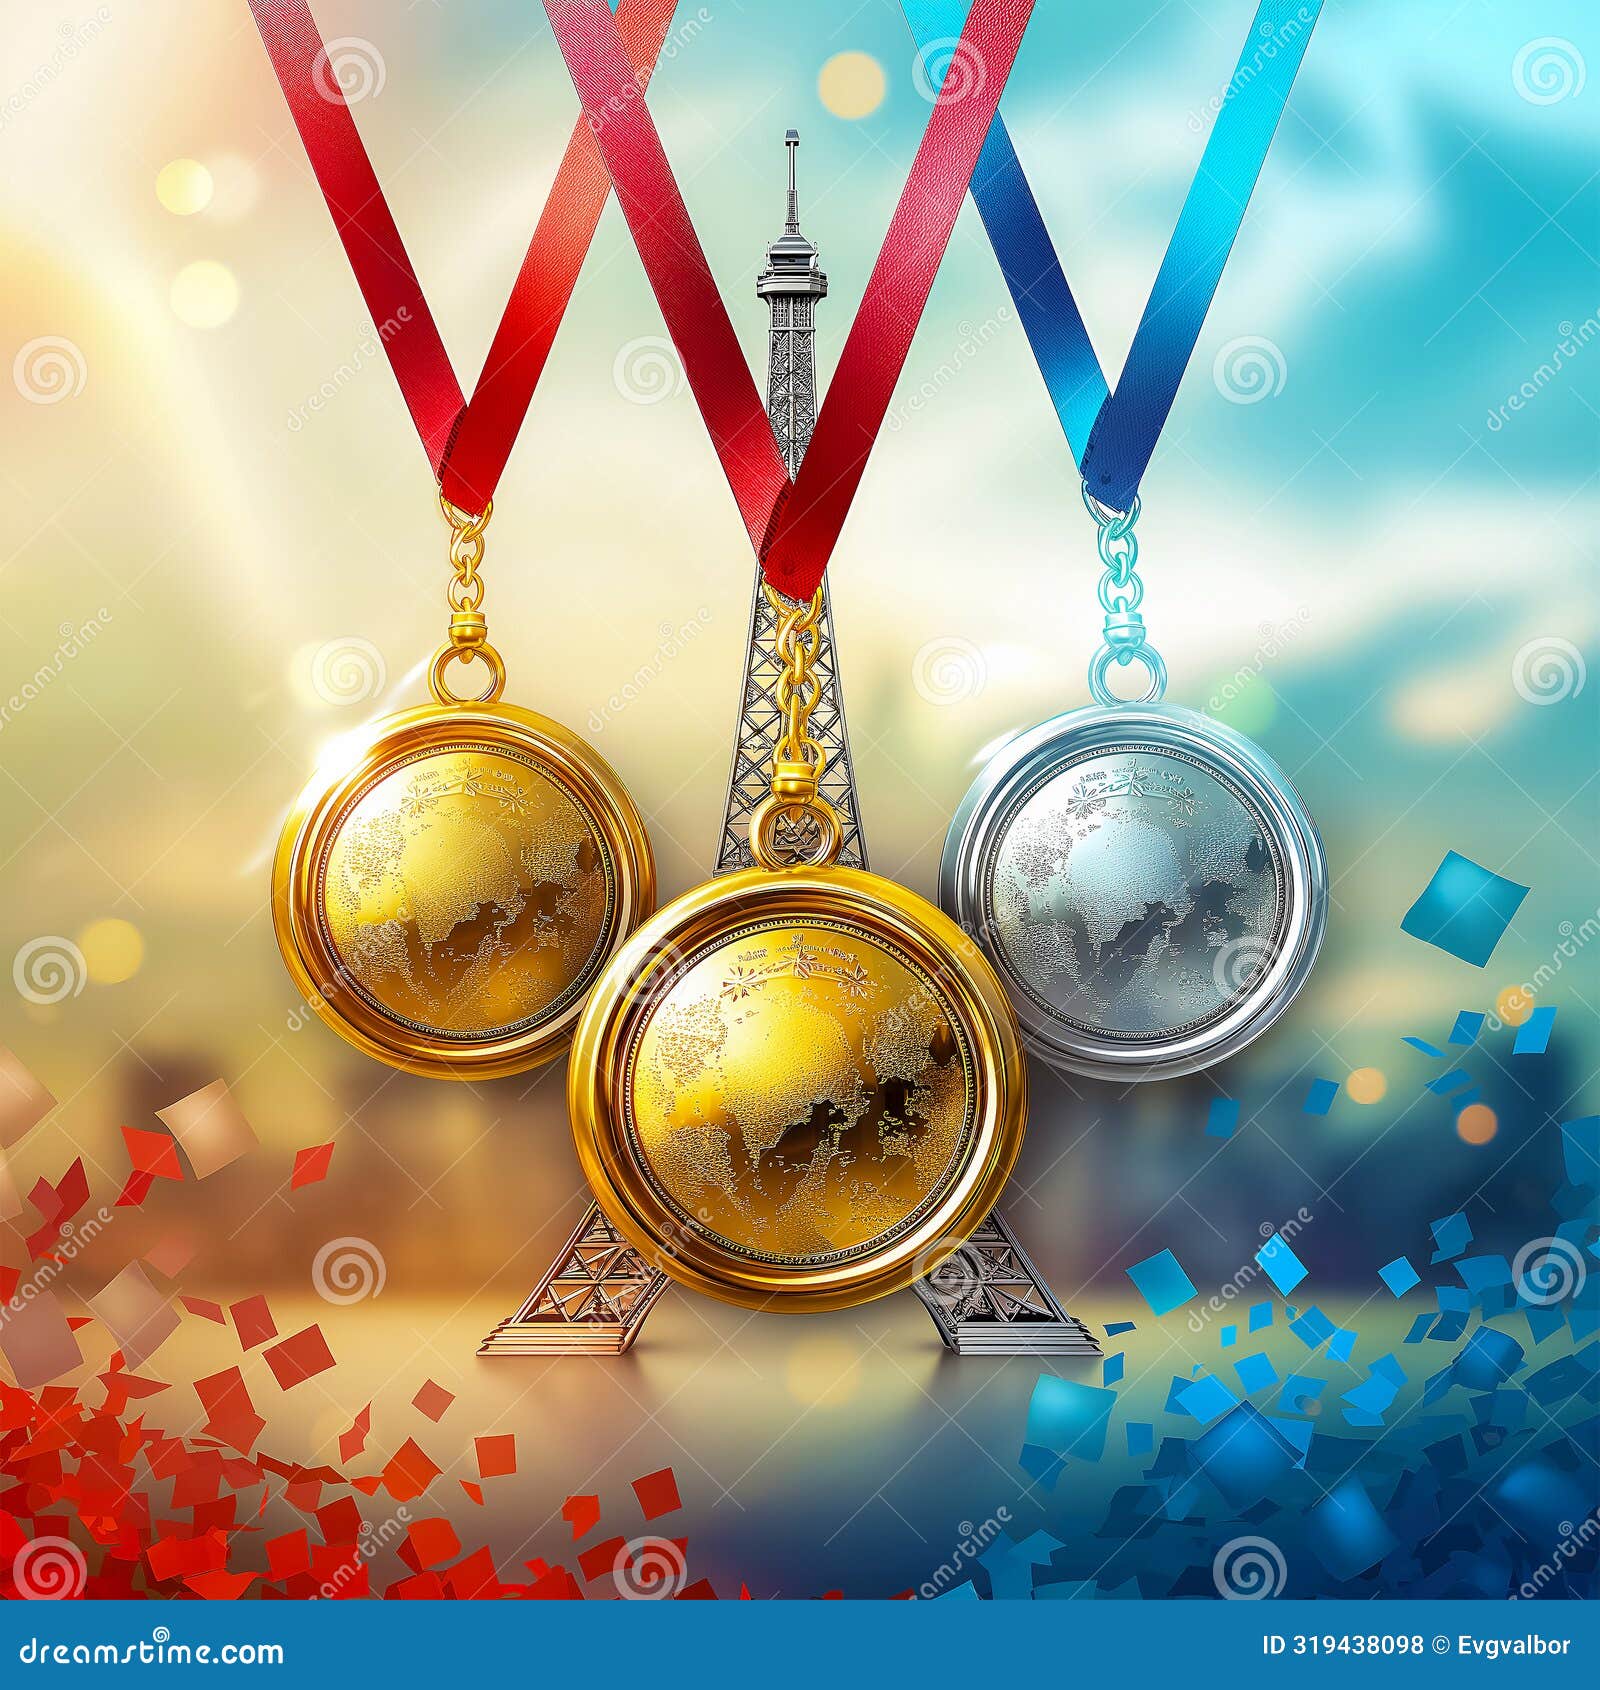 the olympic games in paris, france, 2024. beautiful and well-deserved gold, silver and bronze medals of the winners on